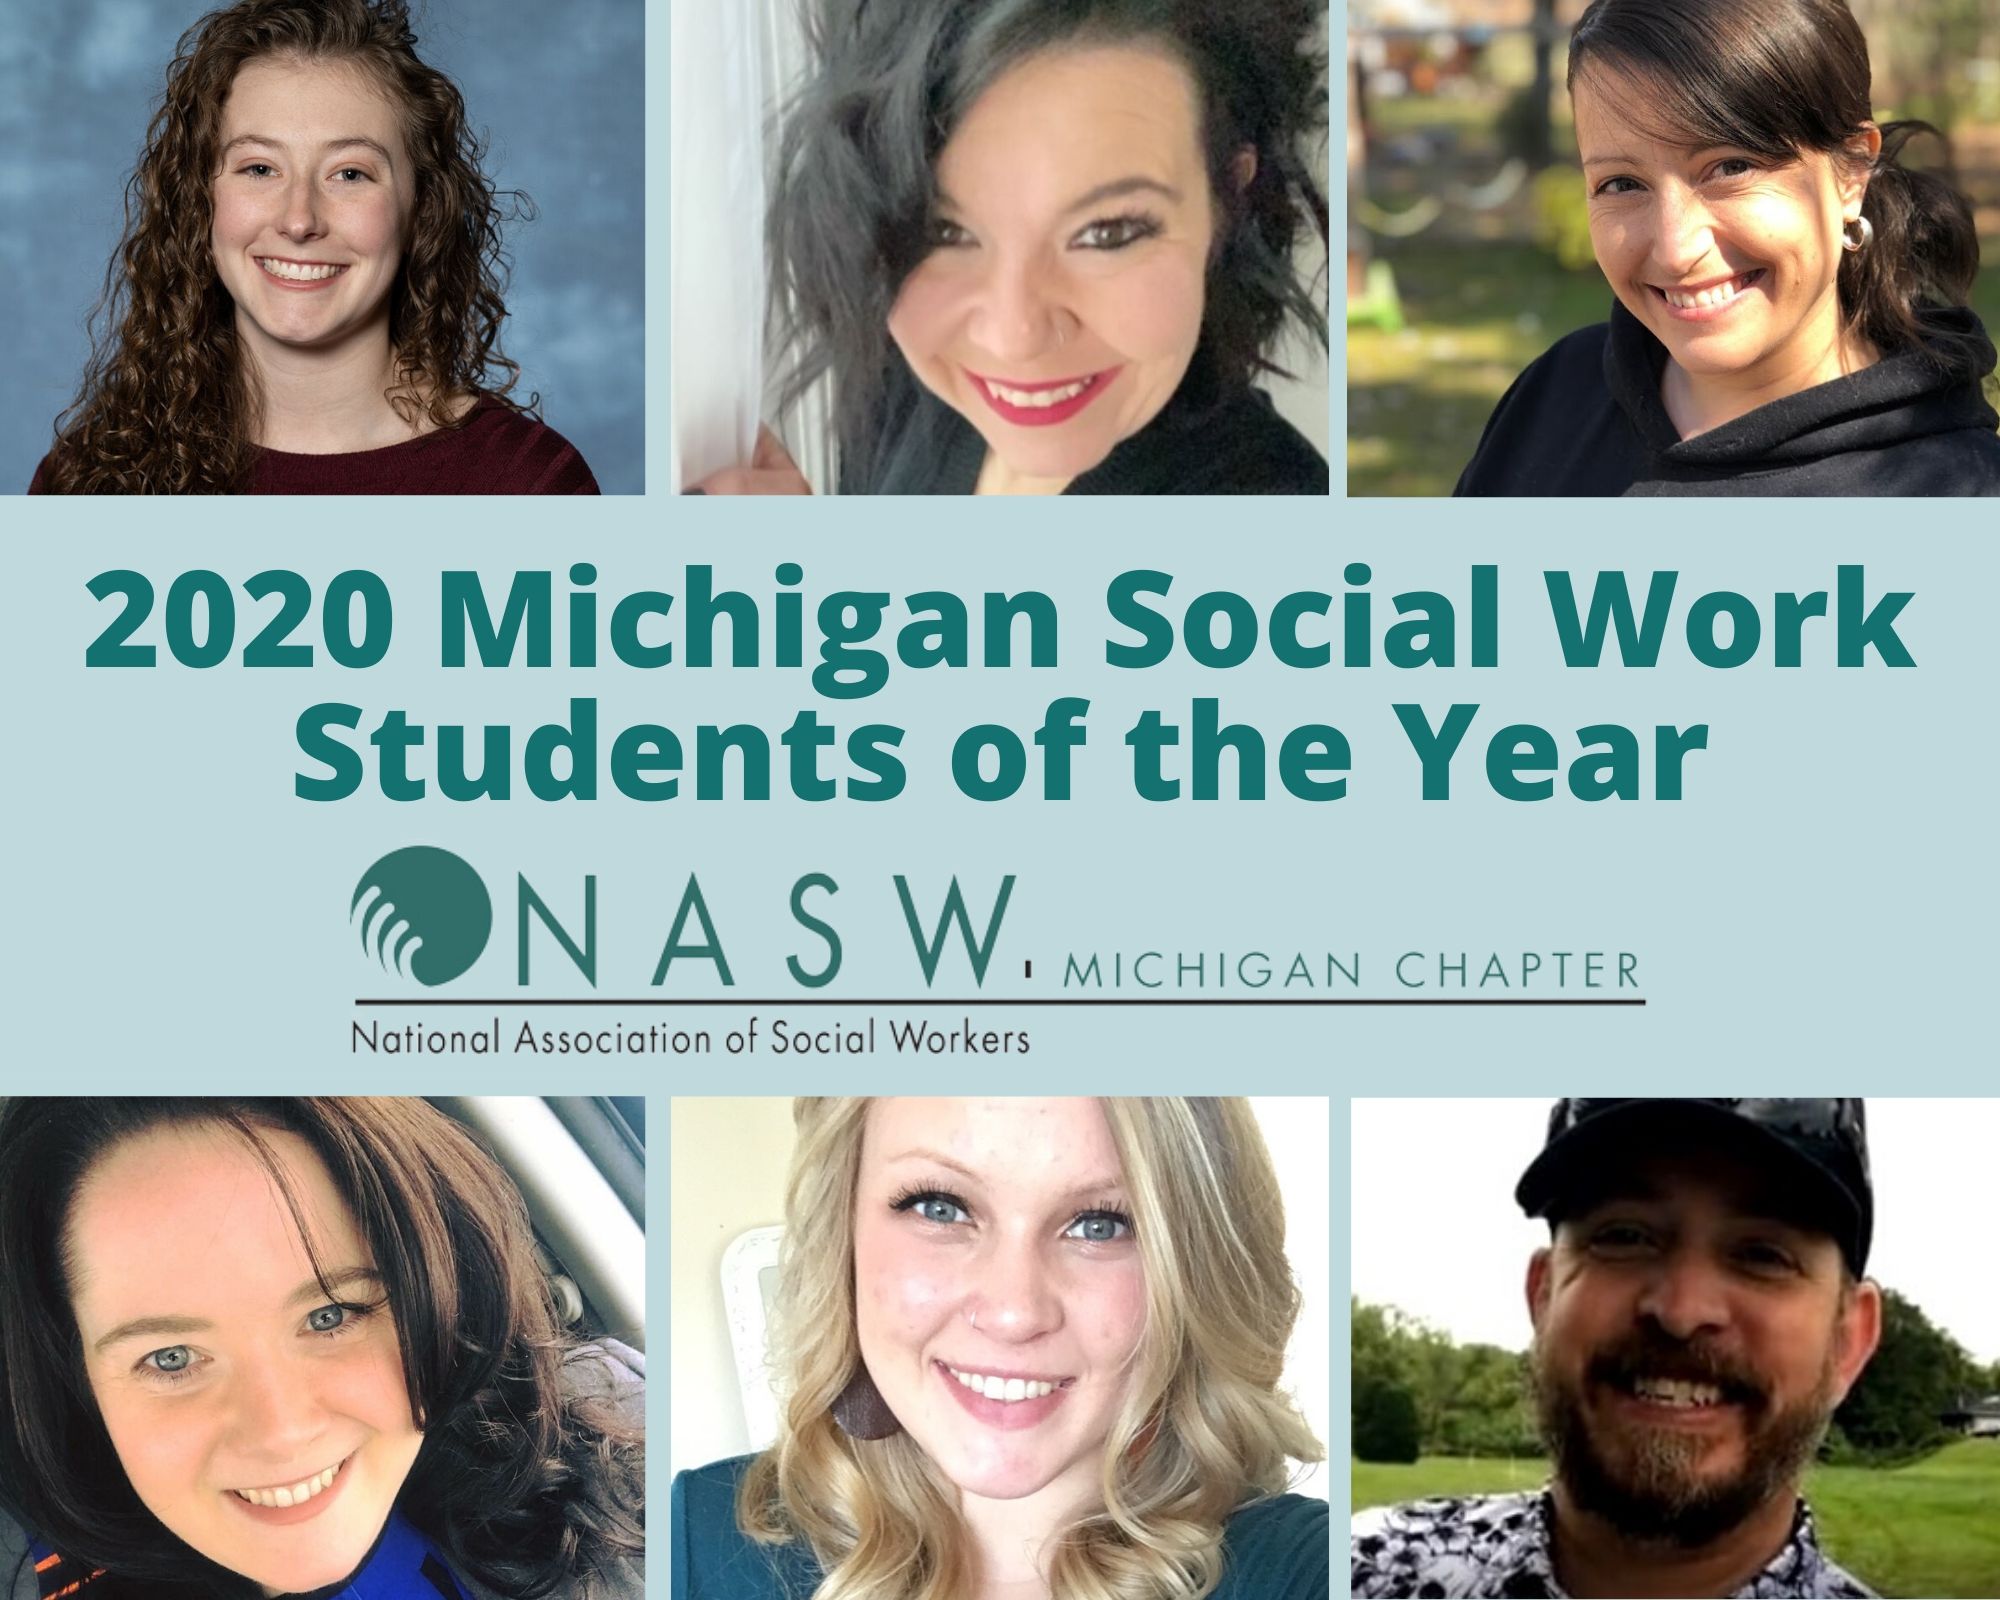 Congratulations to the 2020 Social Work Students of the